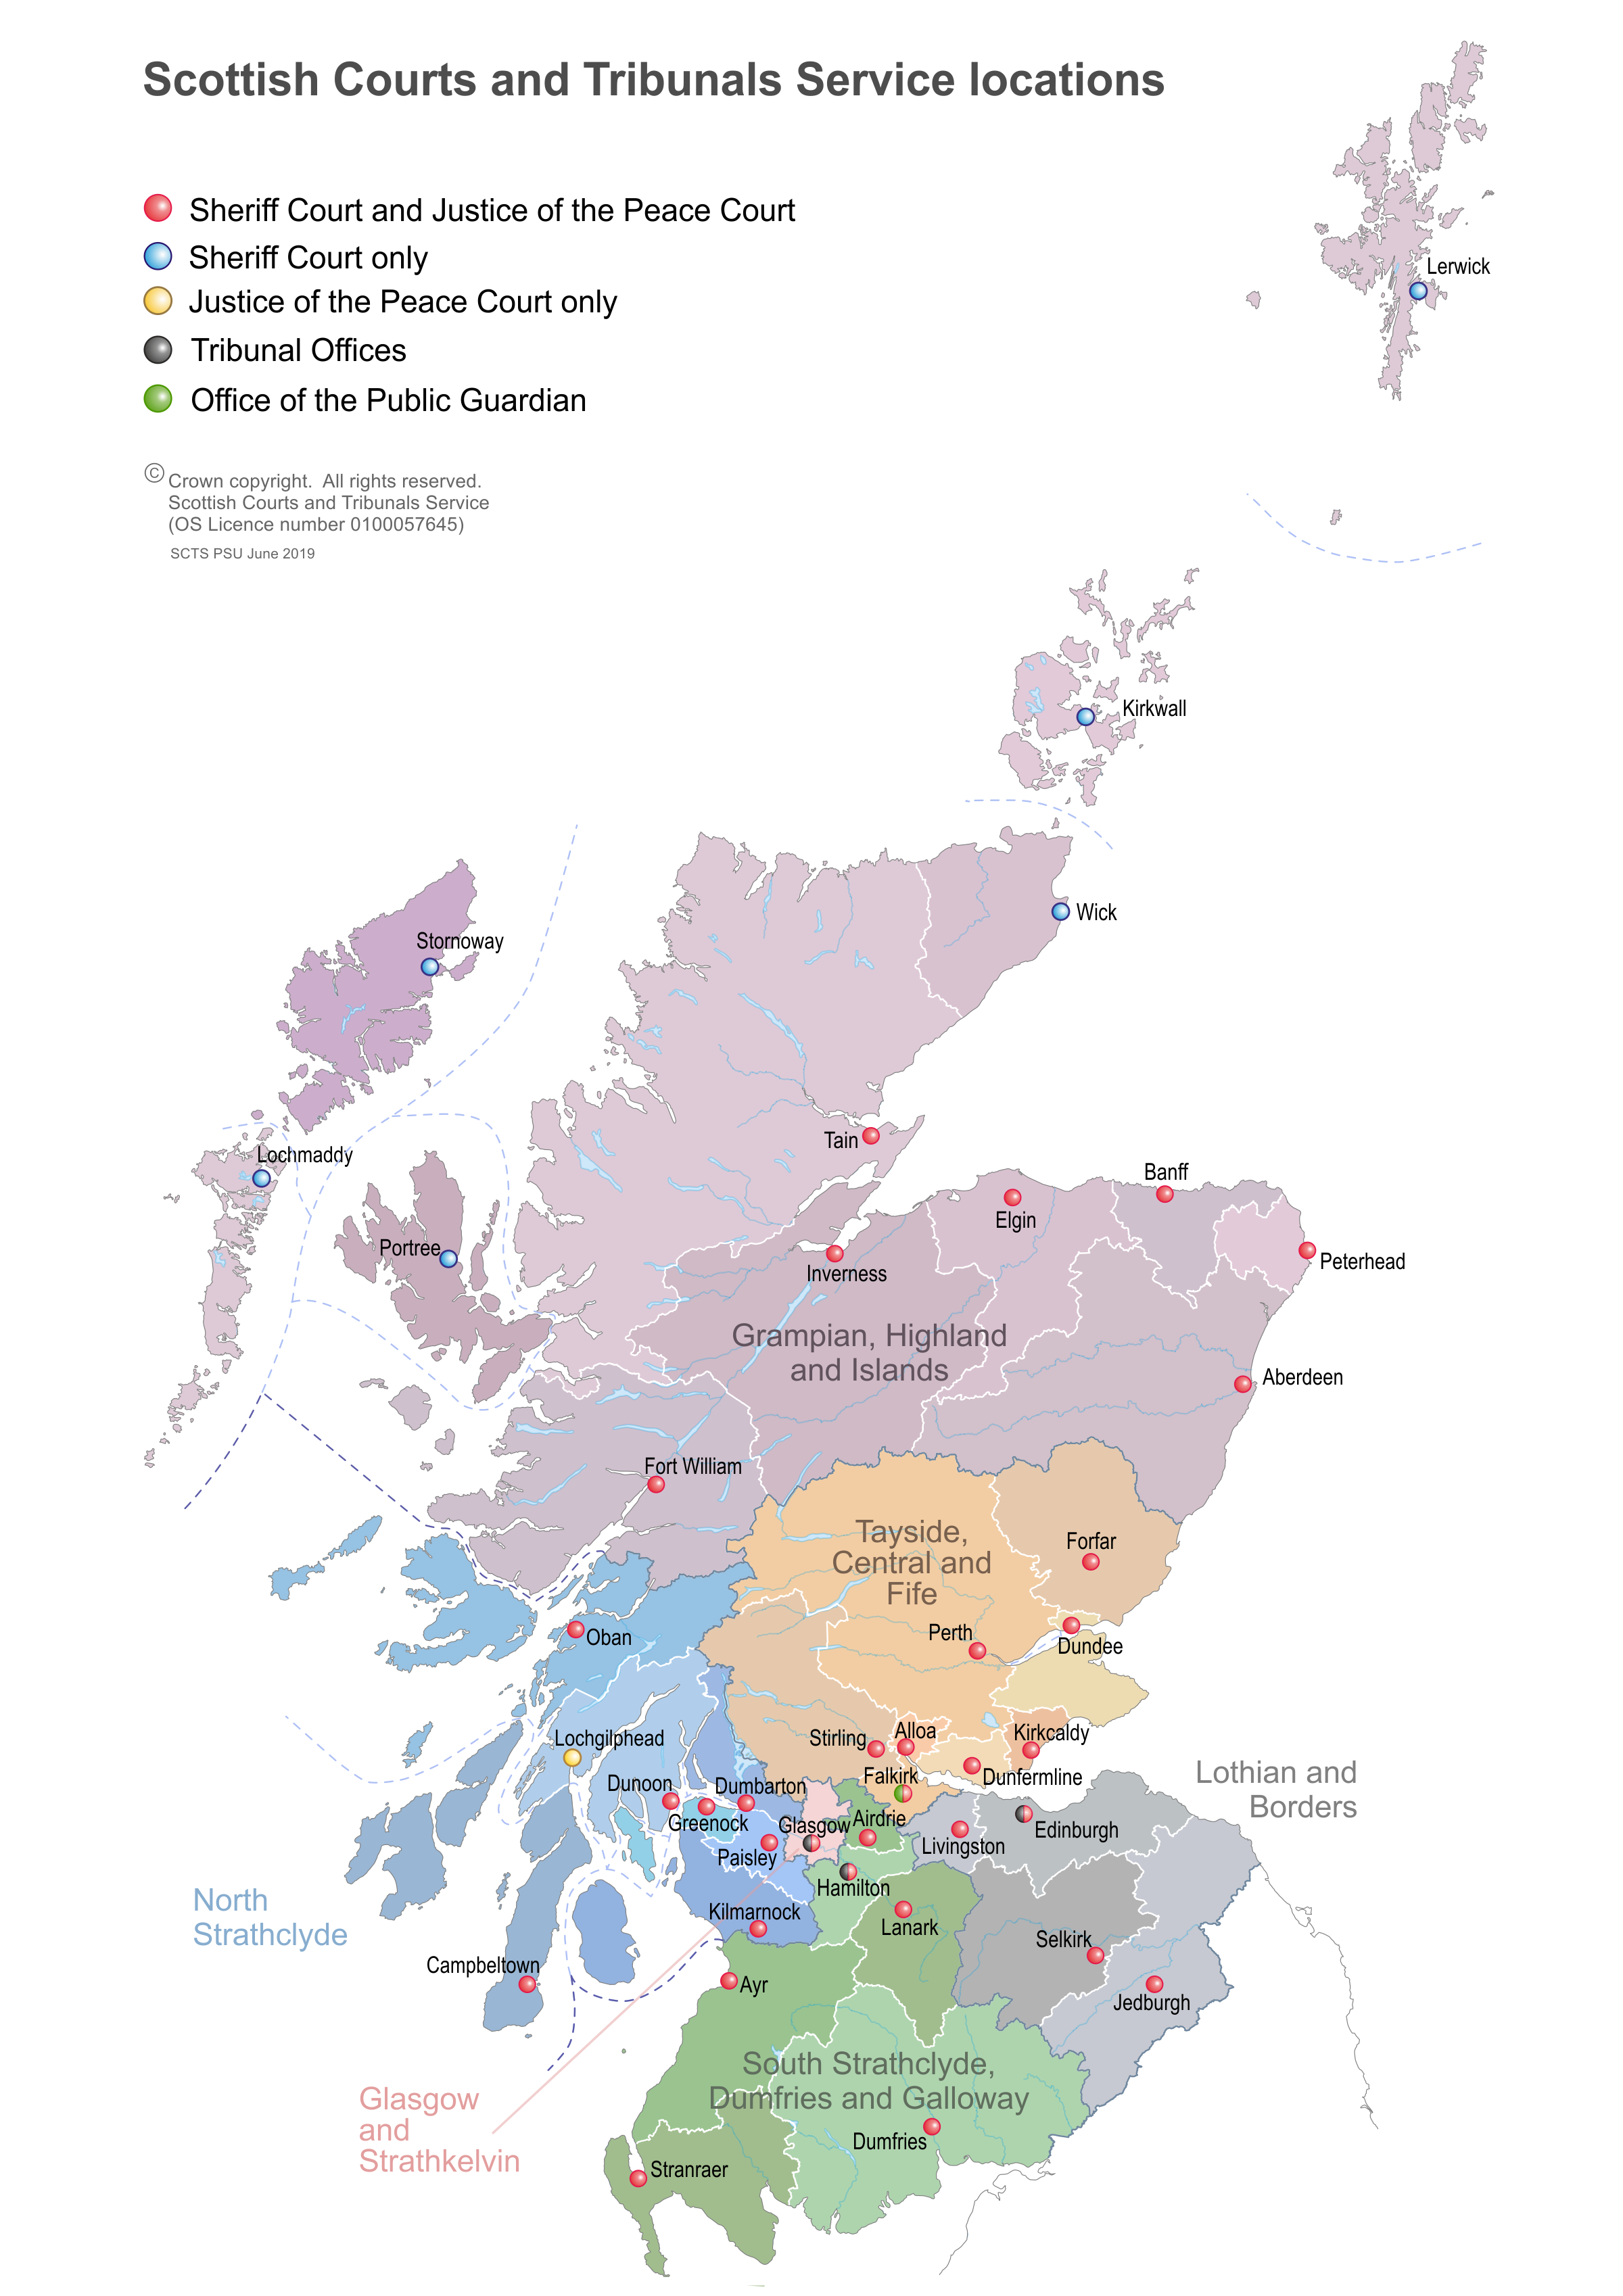 Map of the Scottish Courts and Tribunals locations